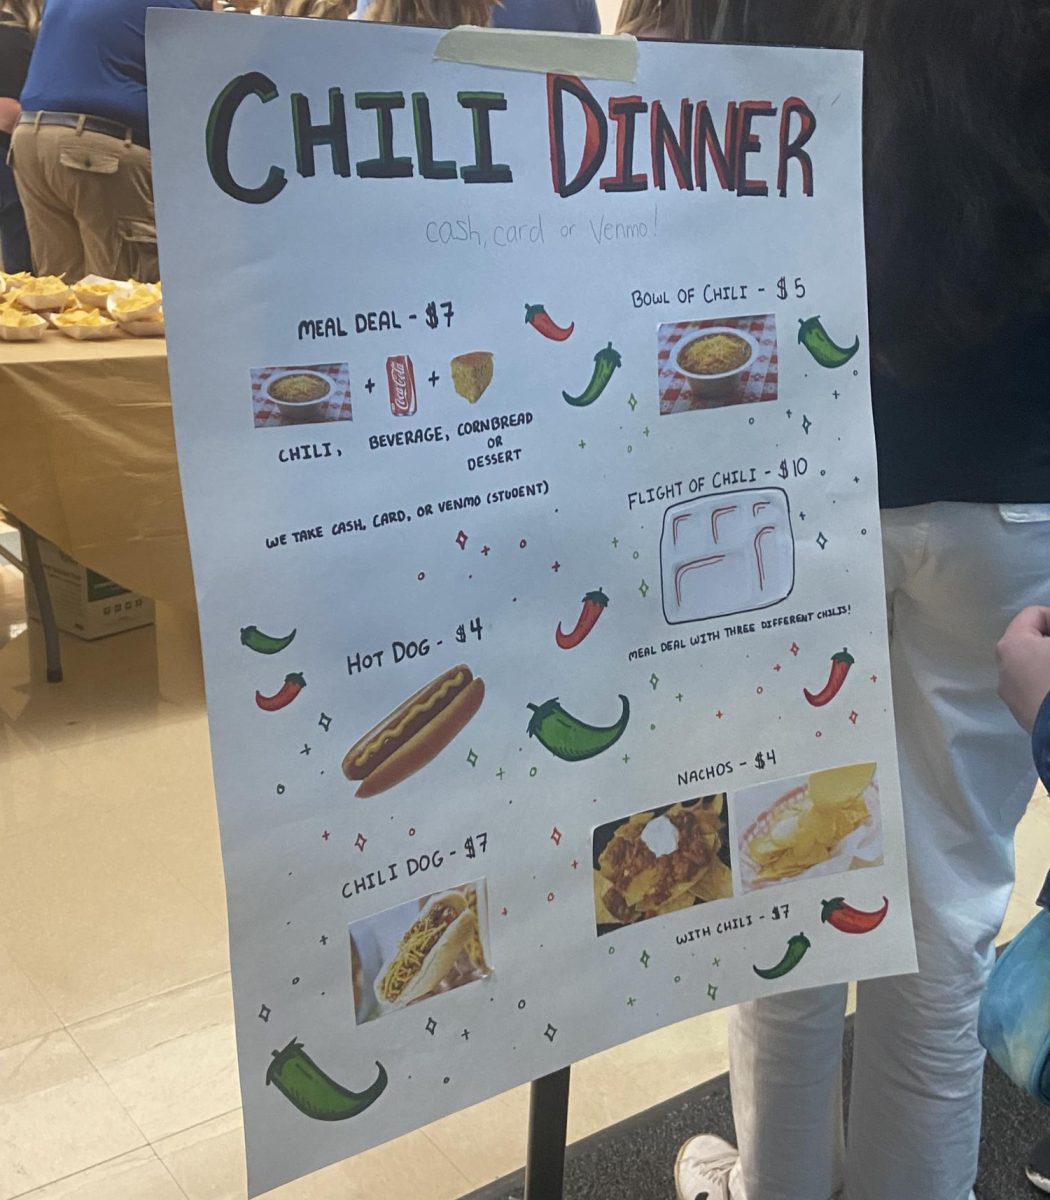 Decorated with drawn-on chili peppers and sparkles, the Chili Dinner menu is displayed at the cafeteria entrance Sept. 21. The pictures of offered dishes included prices and deals.